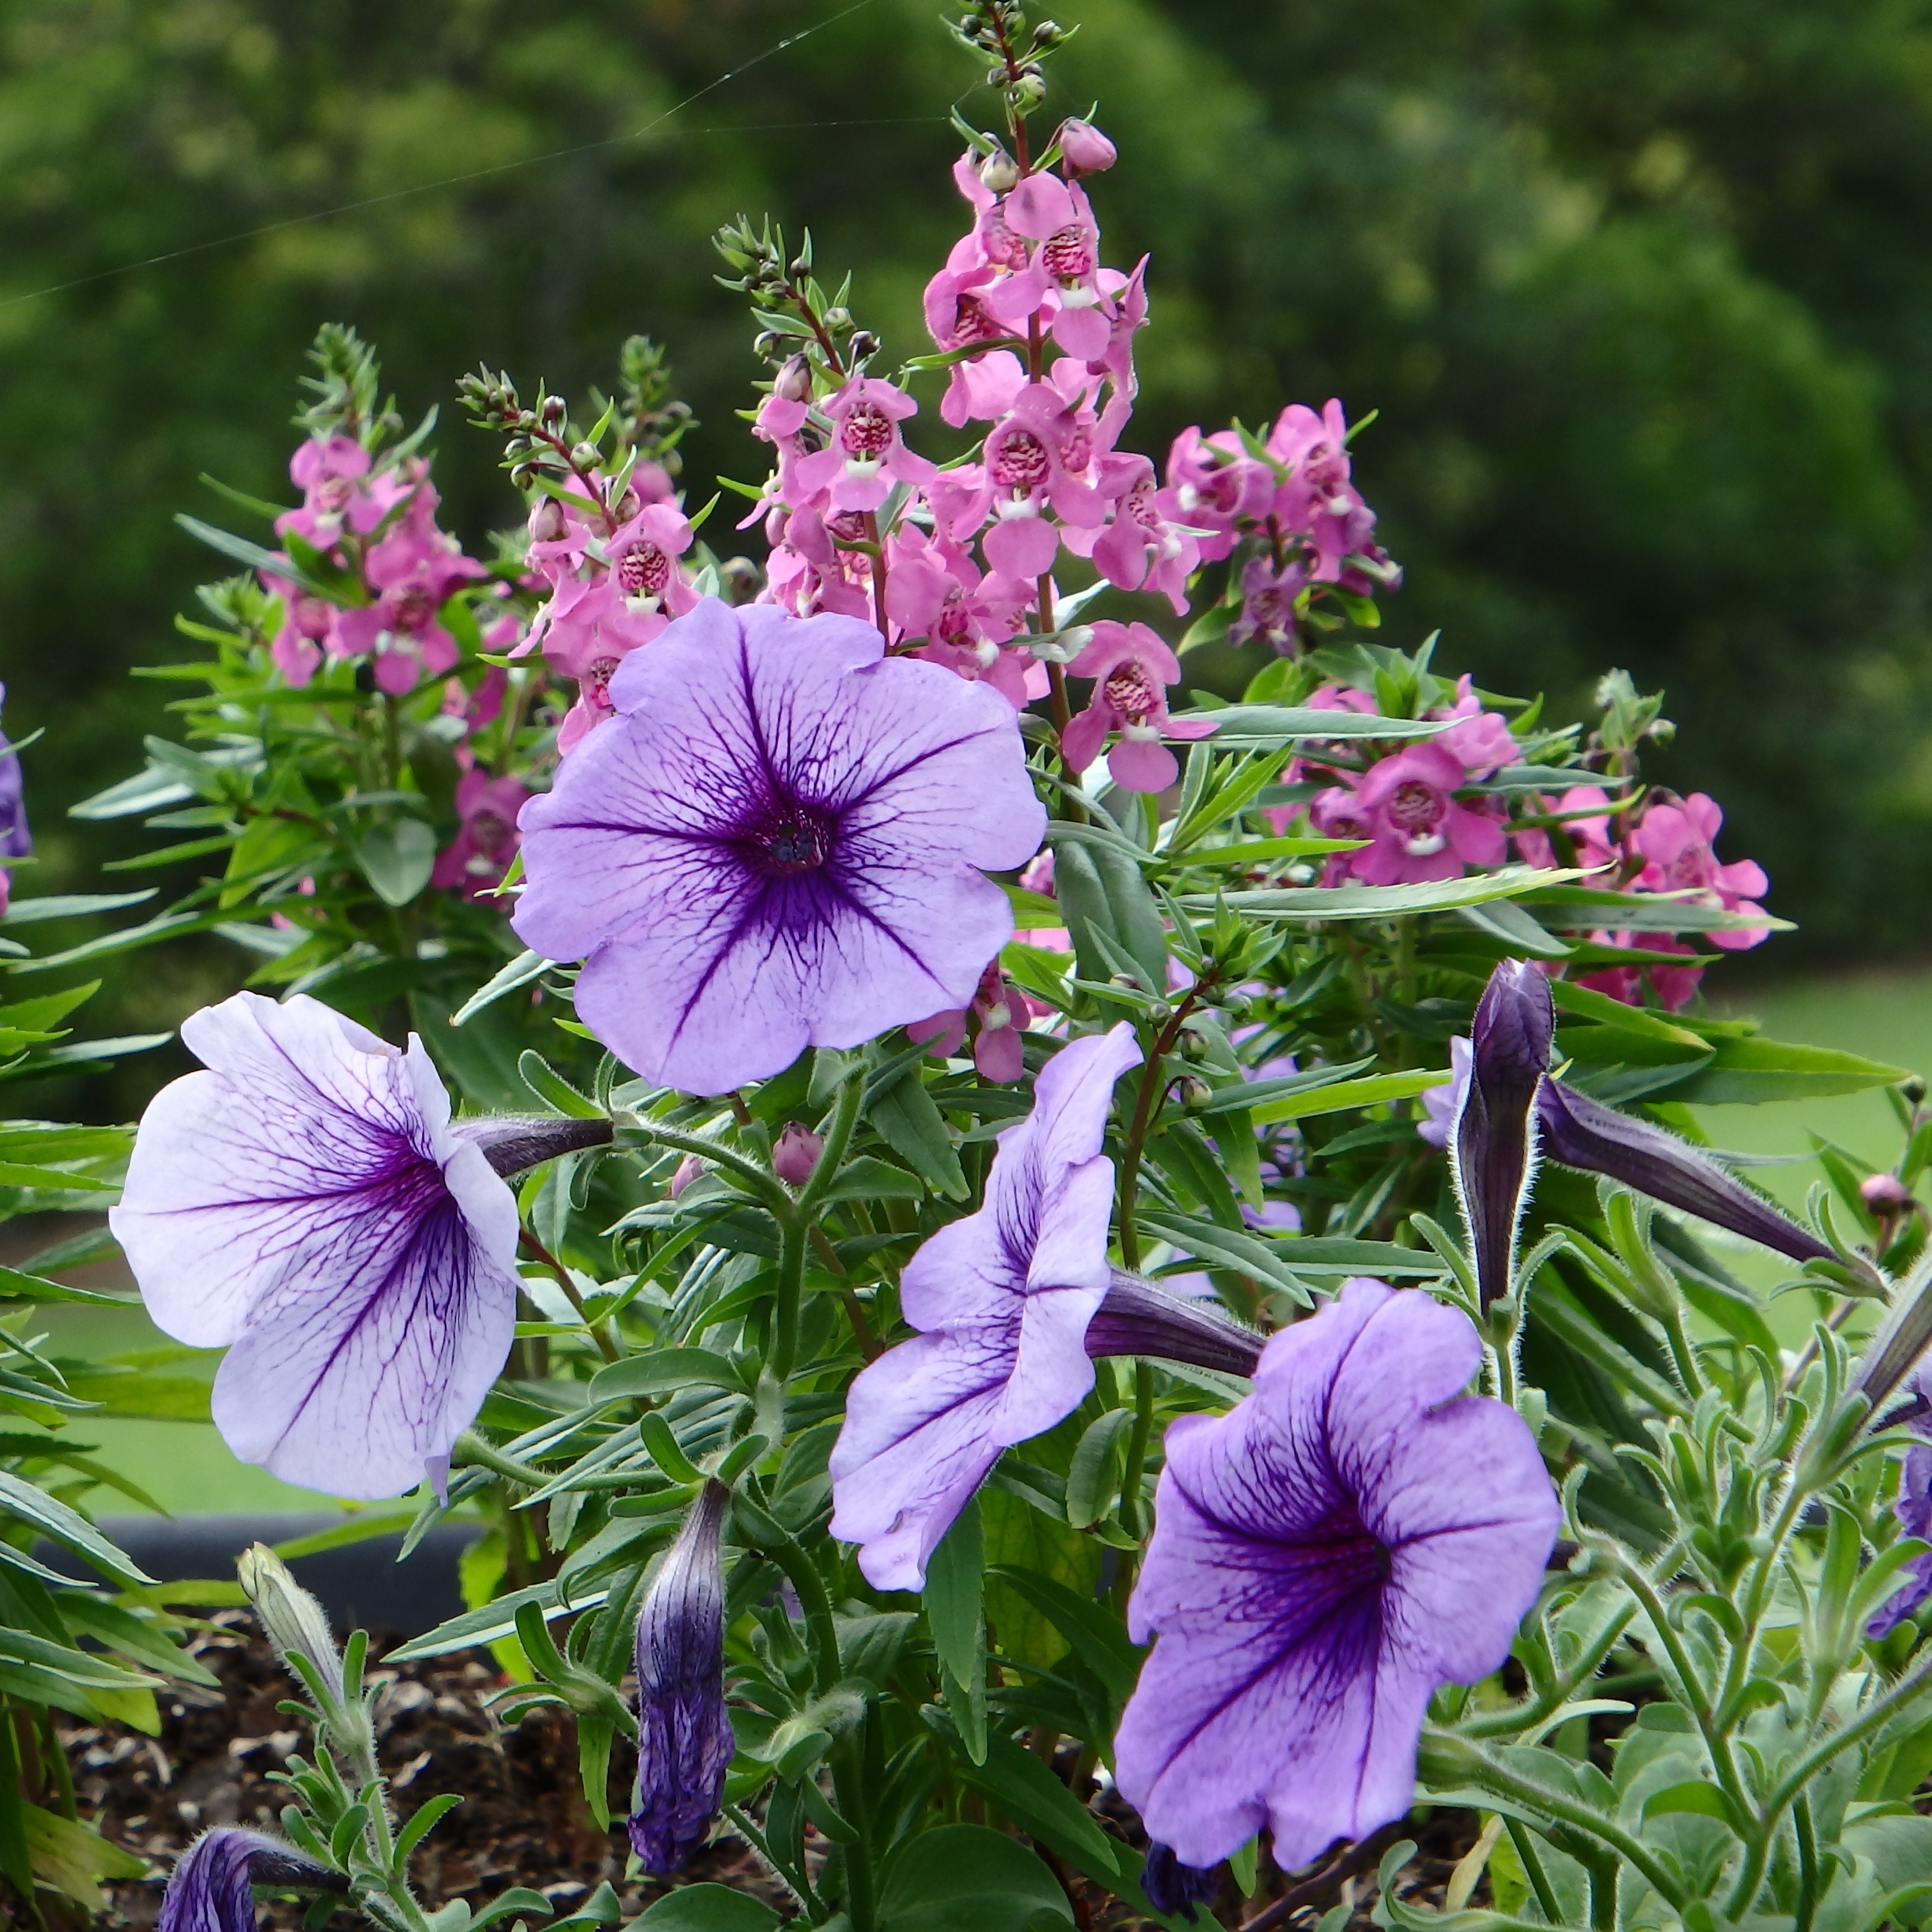 white-and-purple flowers